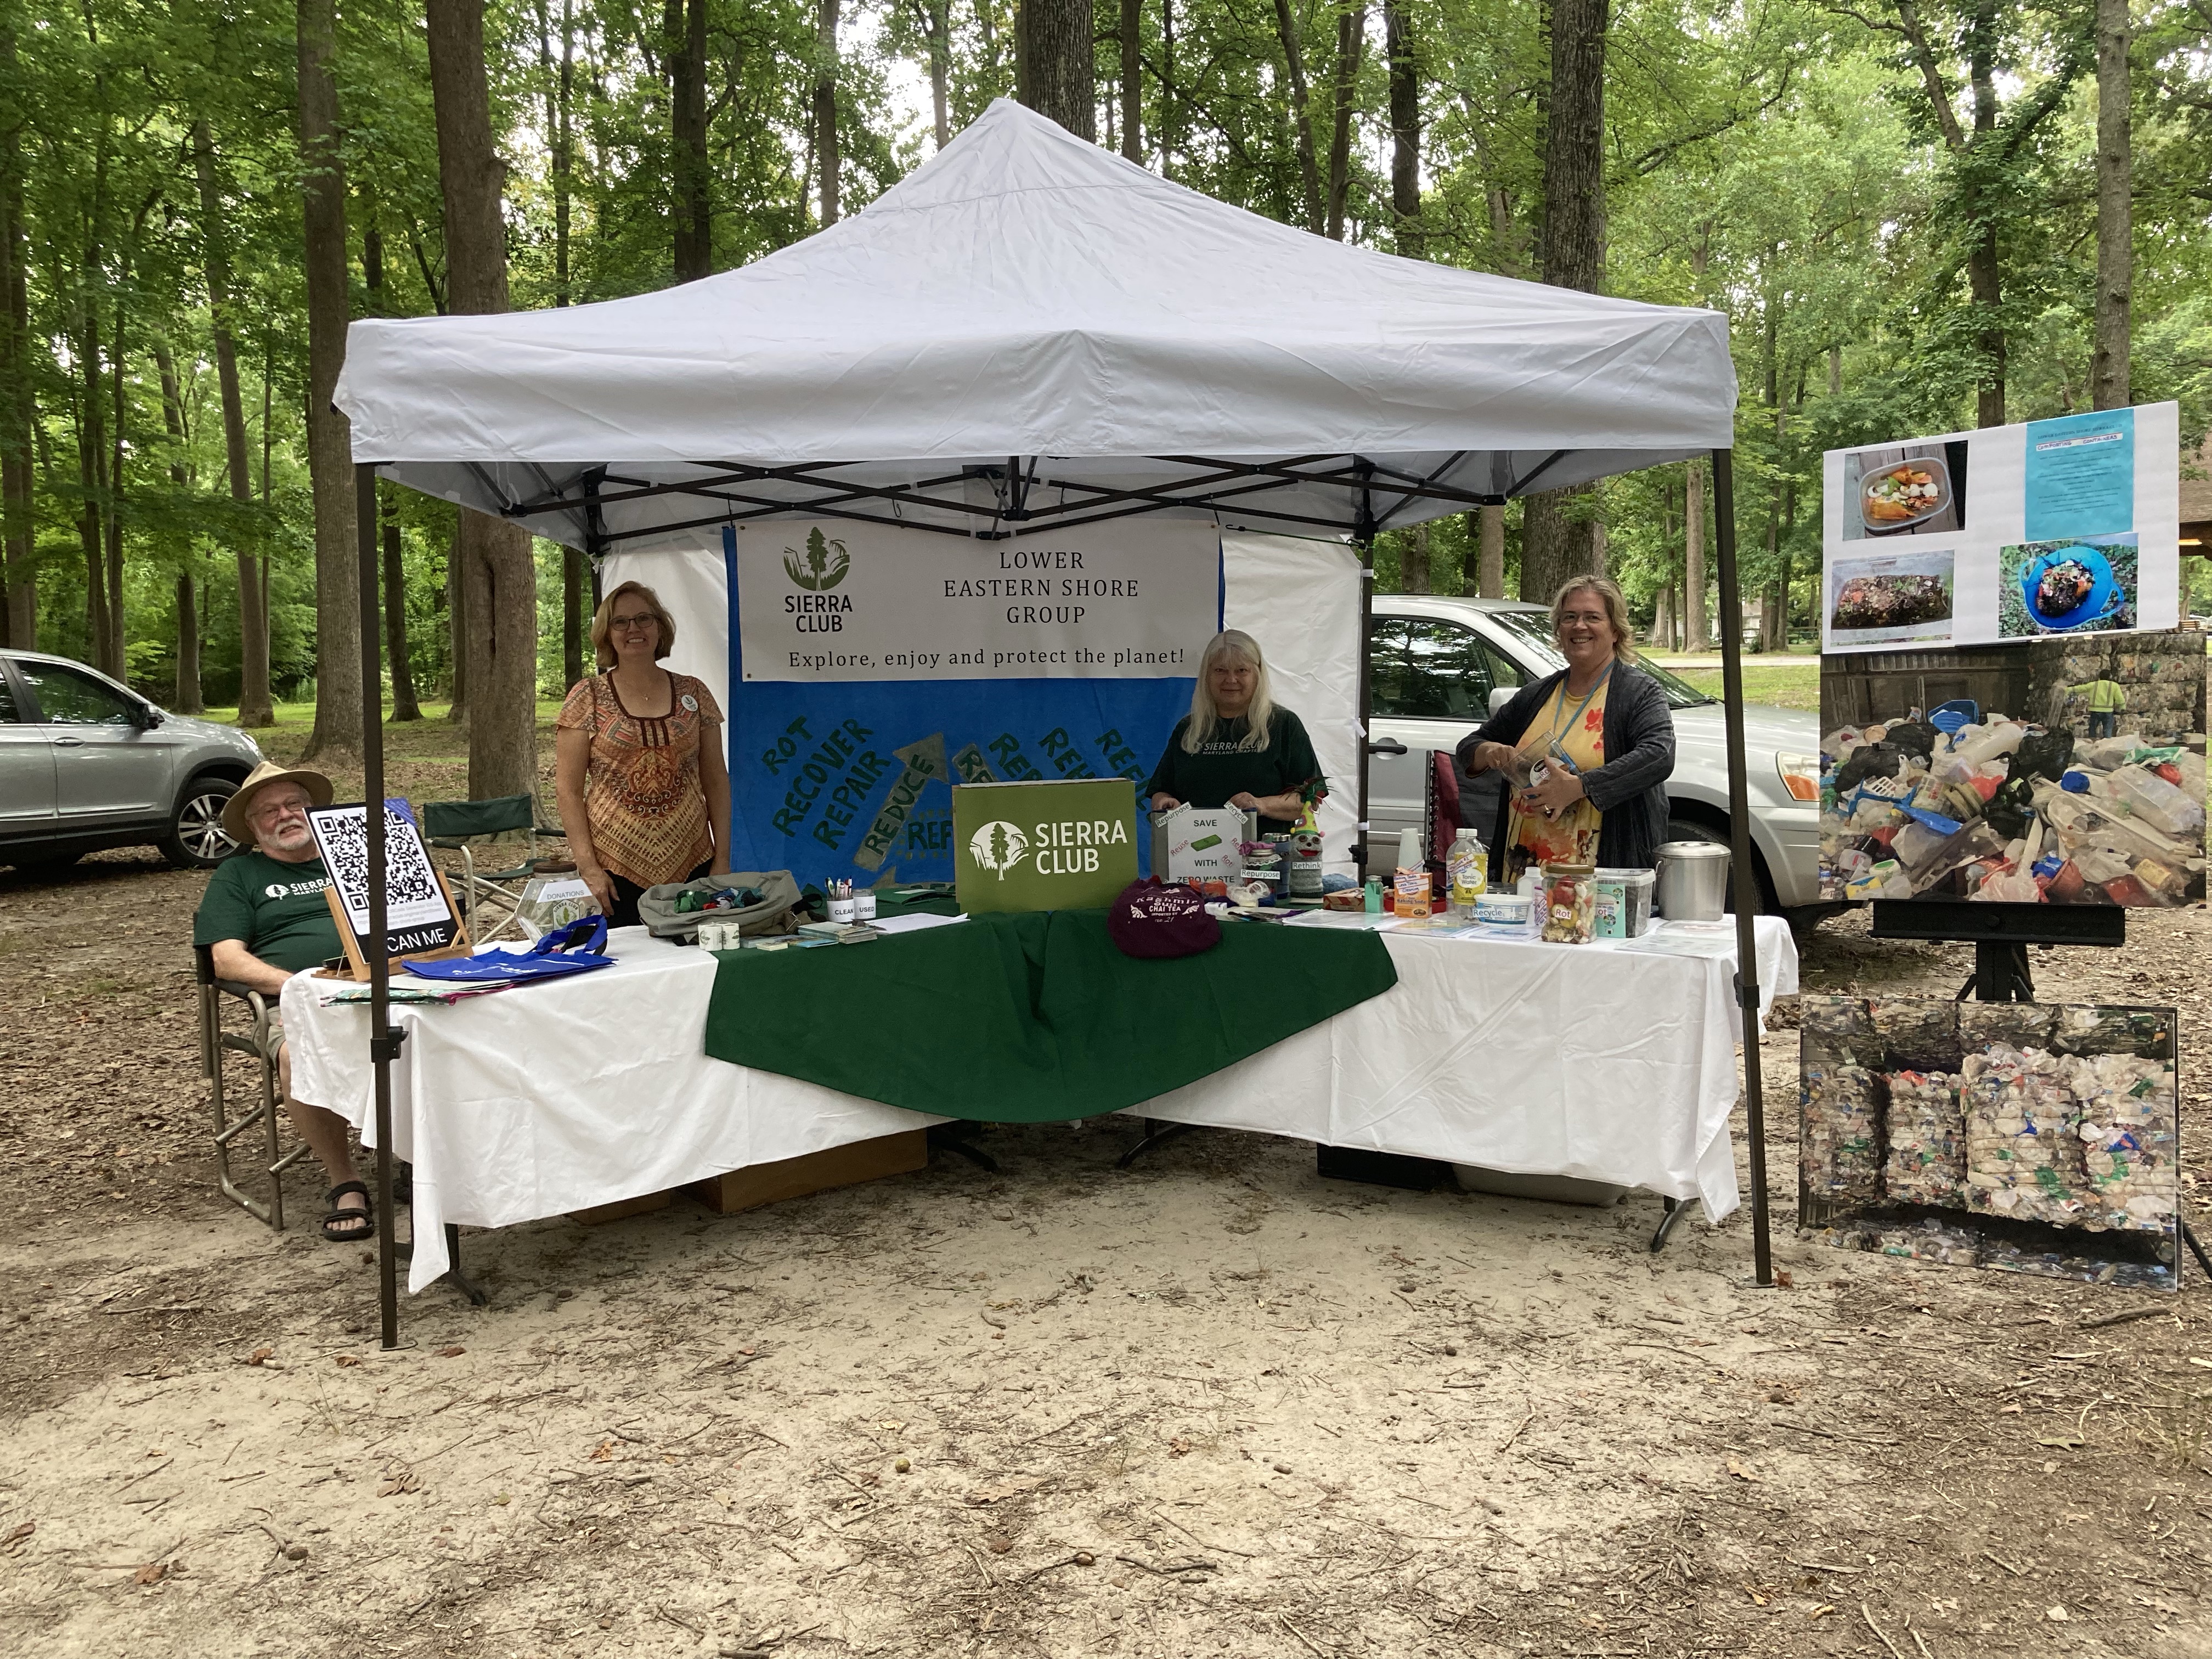 "Lower Eastern Shore Zero Waste Team Presents" at Ocean Pines Farmers and Artisans Market, 7/31/21